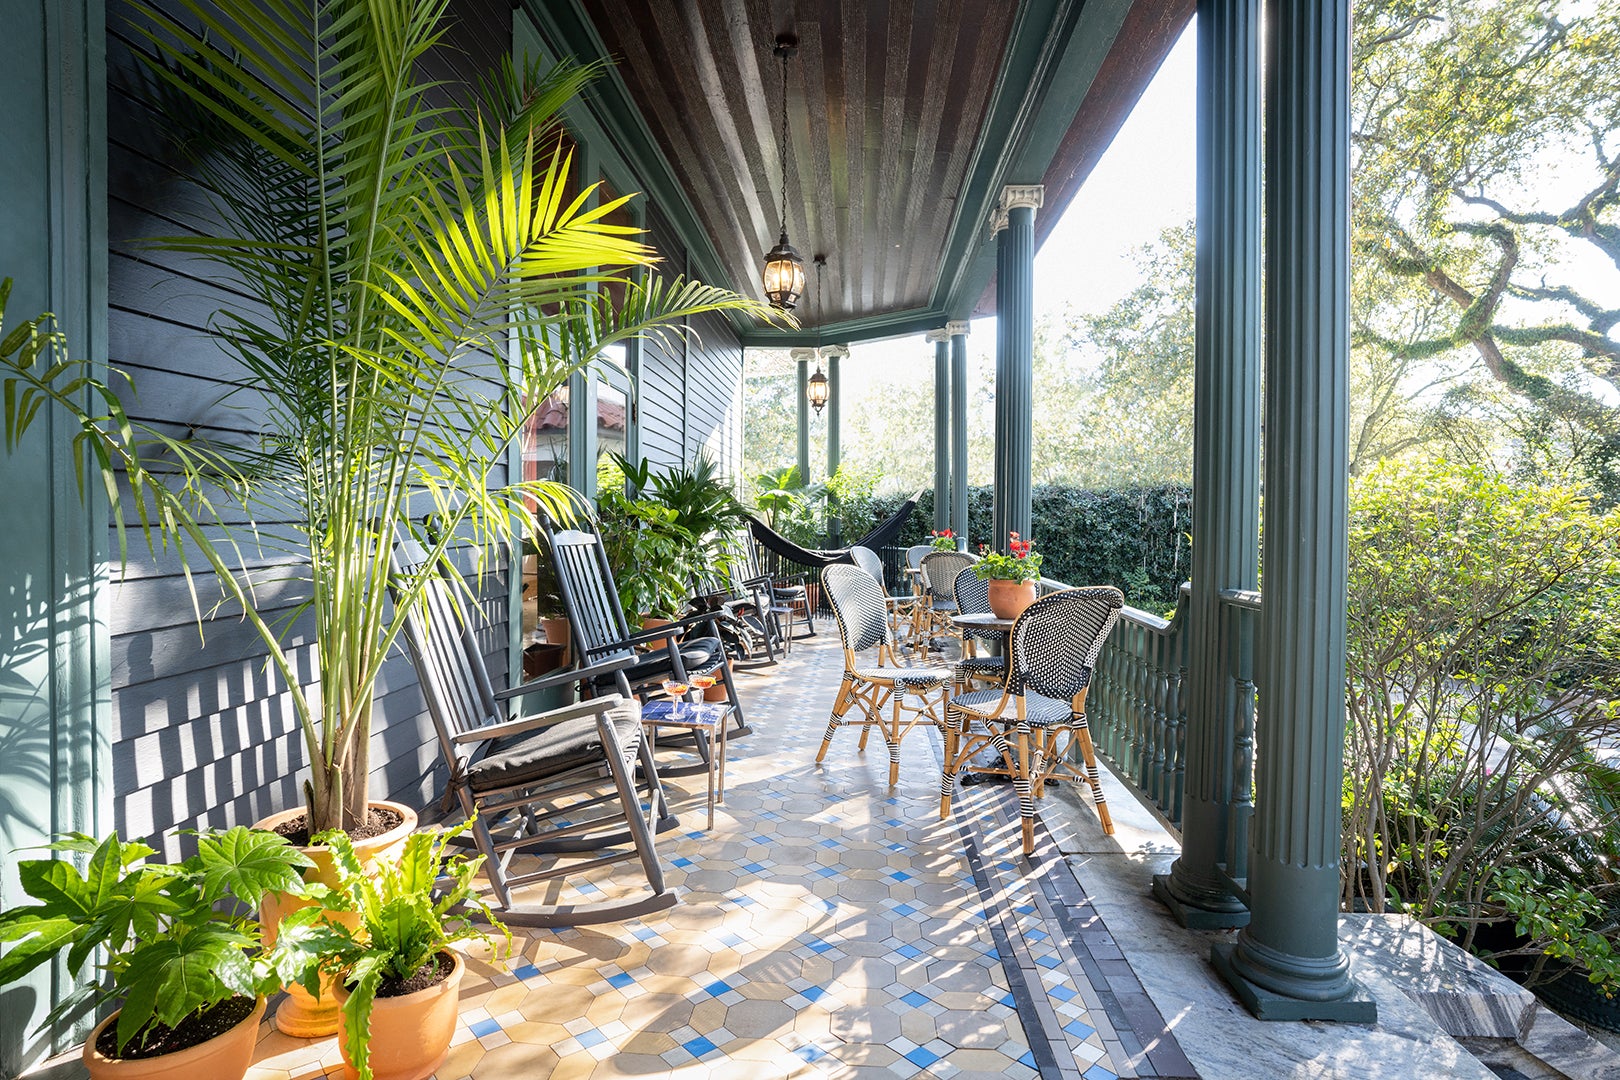 The Best New Orleans Hotels for Good Design, According to a Local